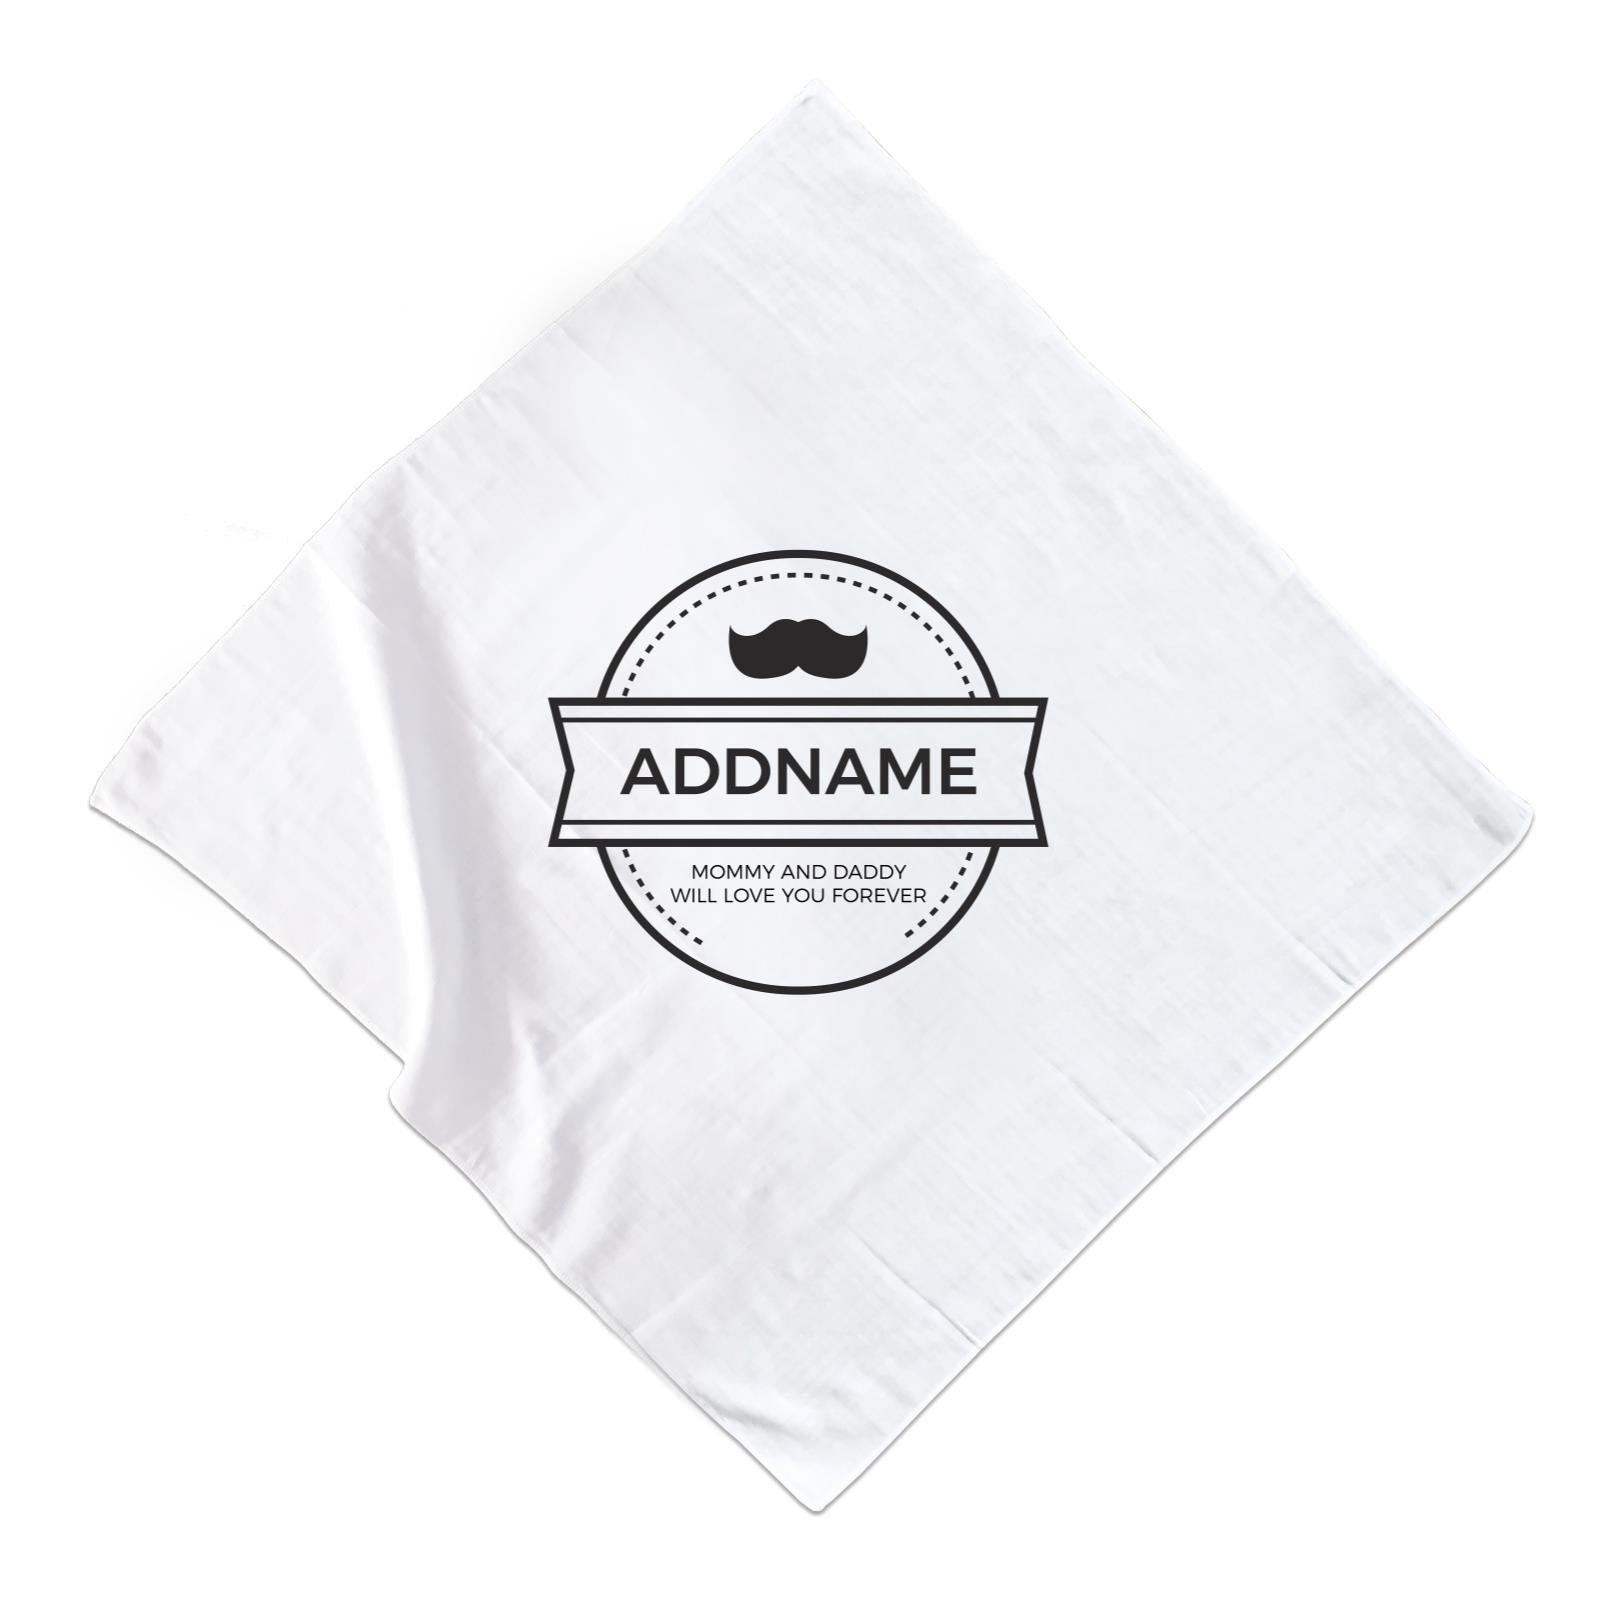 Moustache Emblem Personalizable with Name and Text Muslin Square